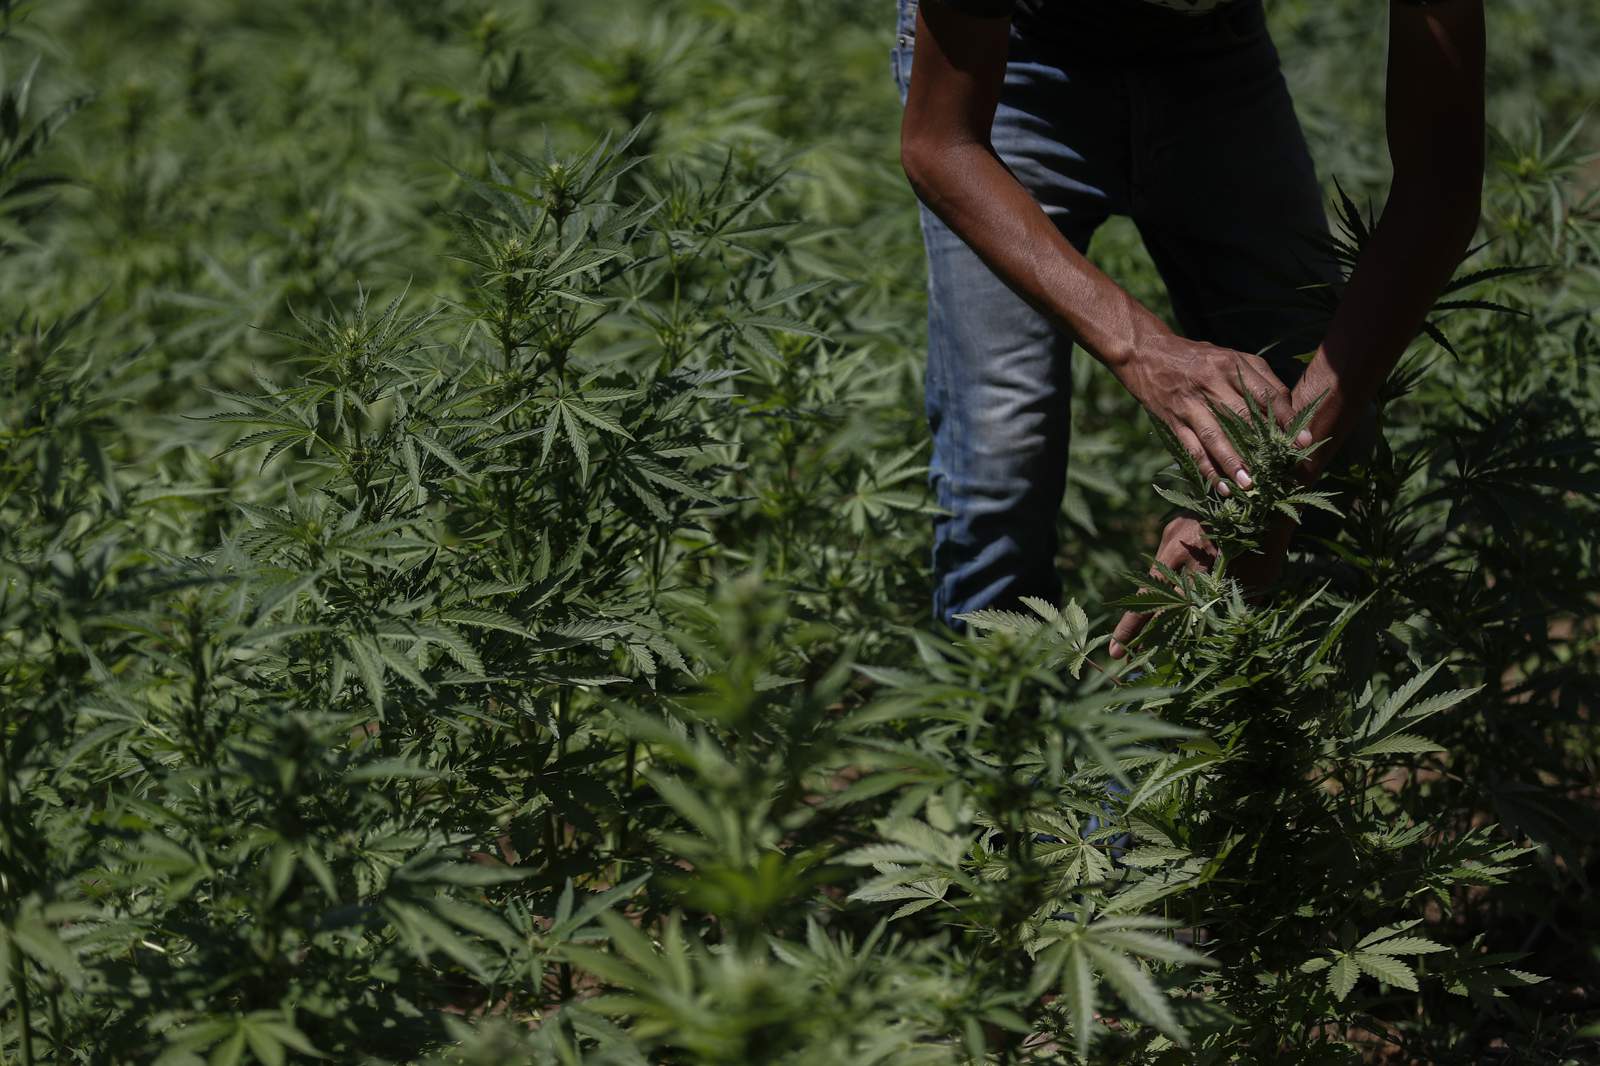 Growers fret as Mexico moves to legalize marijuana